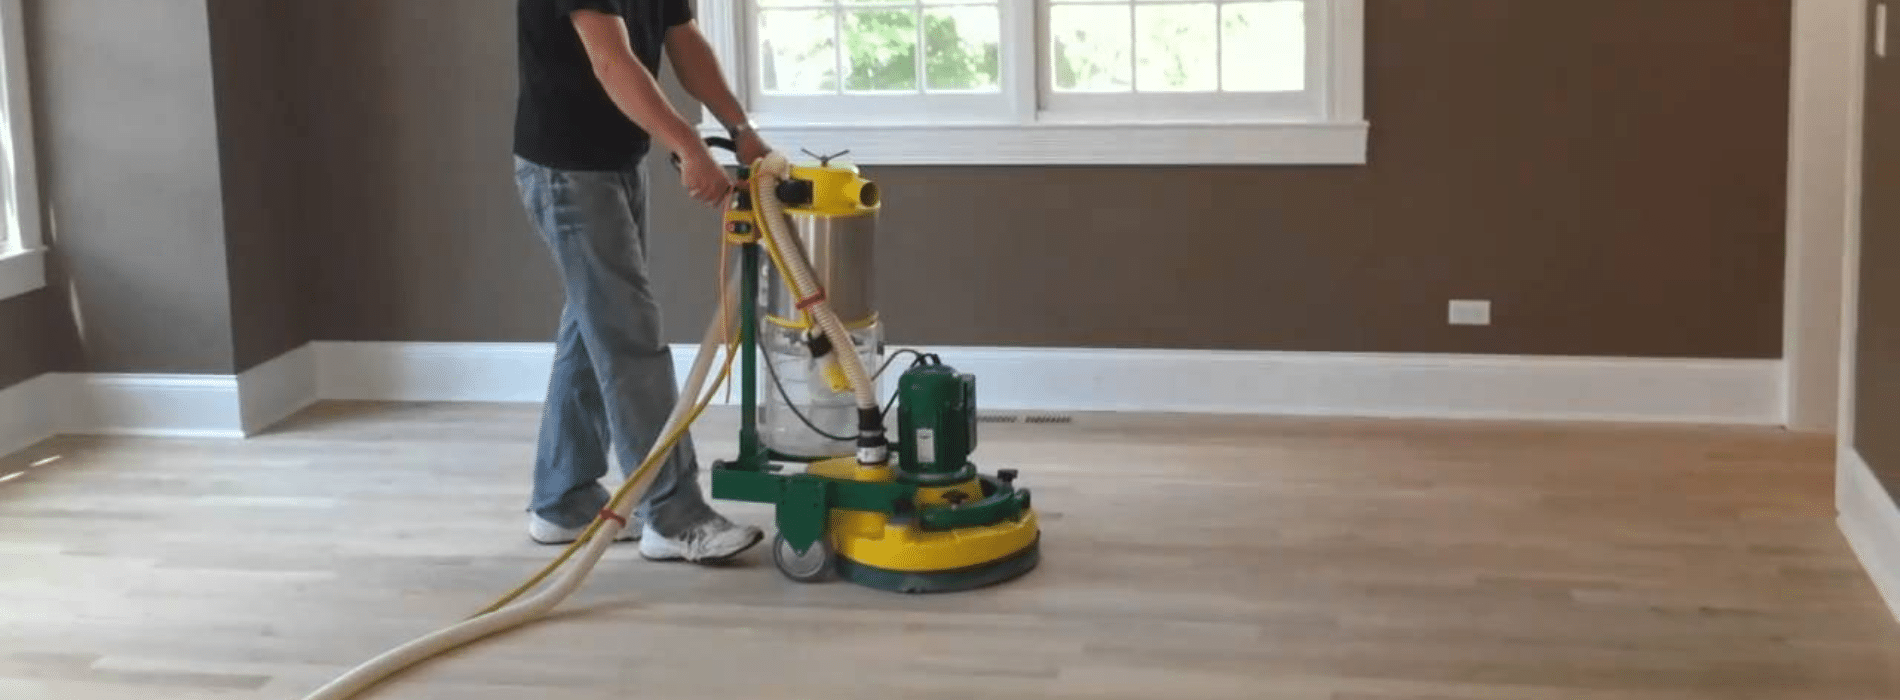 In Brompton, SW3, Mr Sander® utilizing the high-performance Effect 2200 buffer for precision. Voltage: 230V, Frequency: 50-60Hz. Witness the clean and efficient results on a 250x750 mm herringbone floor with the HEPA-filtered dust extraction system.